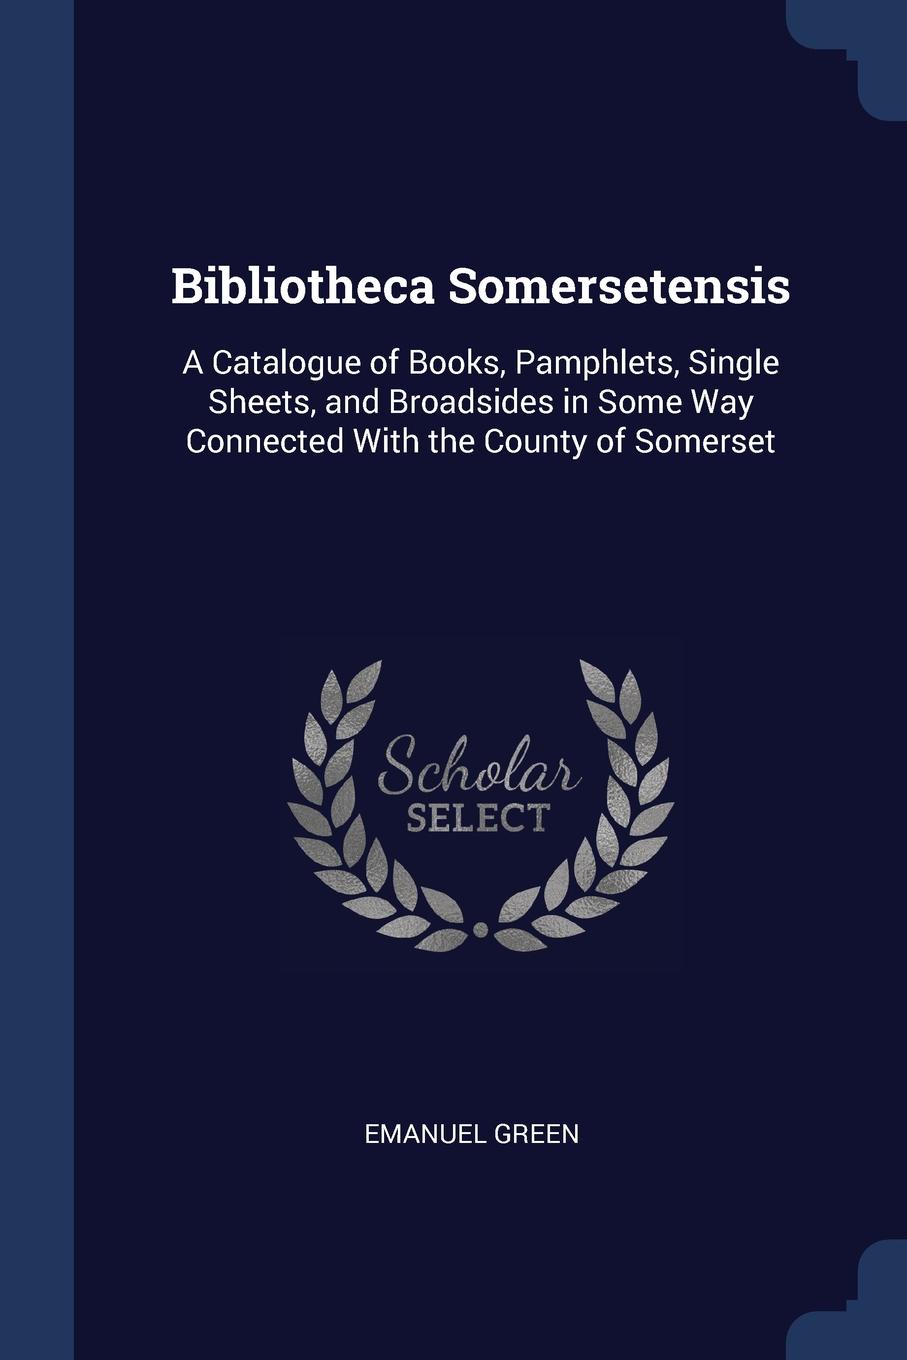 Bibliotheca Somersetensis. A Catalogue of Books, Pamphlets, Single Sheets, and Broadsides in Some Way Connected With the County of Somerset